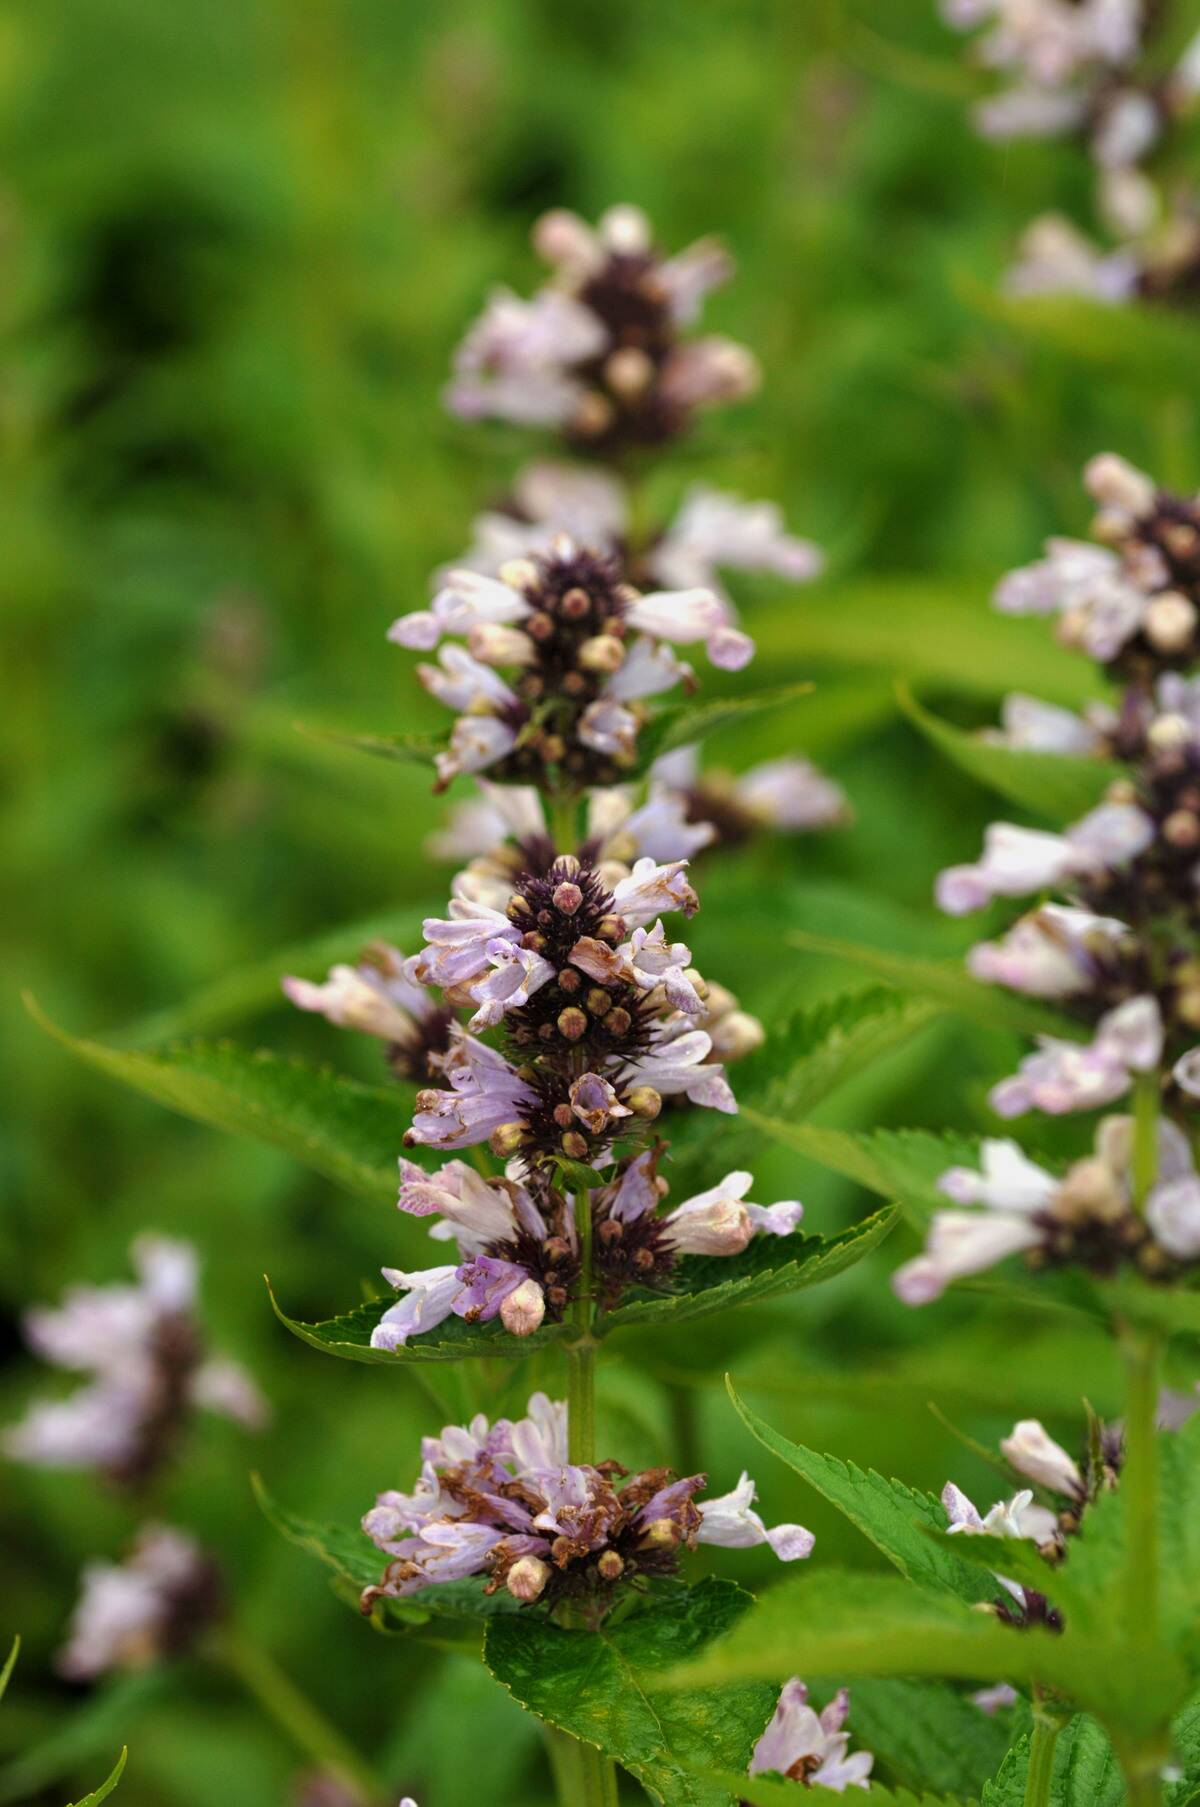 <p>Catmint flowers, also known as Nepeta, are a hardy and reliable addition to any garden. Their long-lasting blooms are a result of their ability to self-seed and naturalize, ensuring a beautiful display year after year. </p> <p>Gardeners should consider planting varieties such as Walker's Low for its attractive blue flowers or Junior Walker for its compact size. Catmint also attracts pollinators, making it a great choice for eco-conscious gardeners.</p>